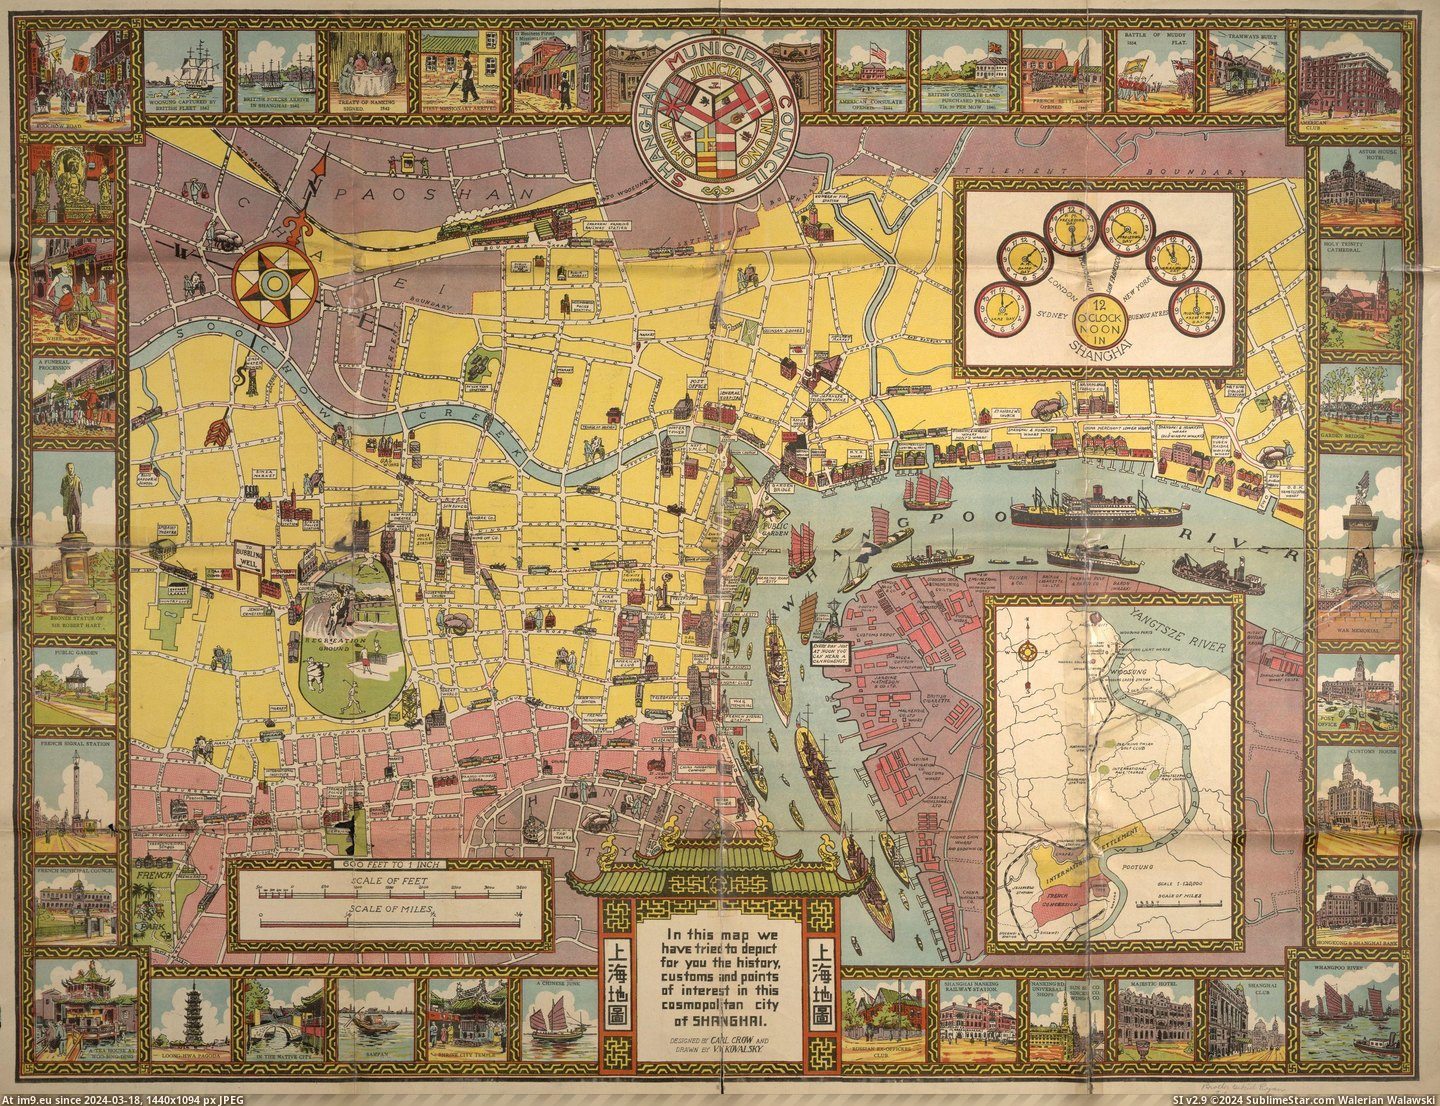 #Art #Shanghai #Map [Mapporn] Art Deco pictorial map of Shanghai, 1935. [2937×2243] Pic. (Image of album My r/MAPS favs))